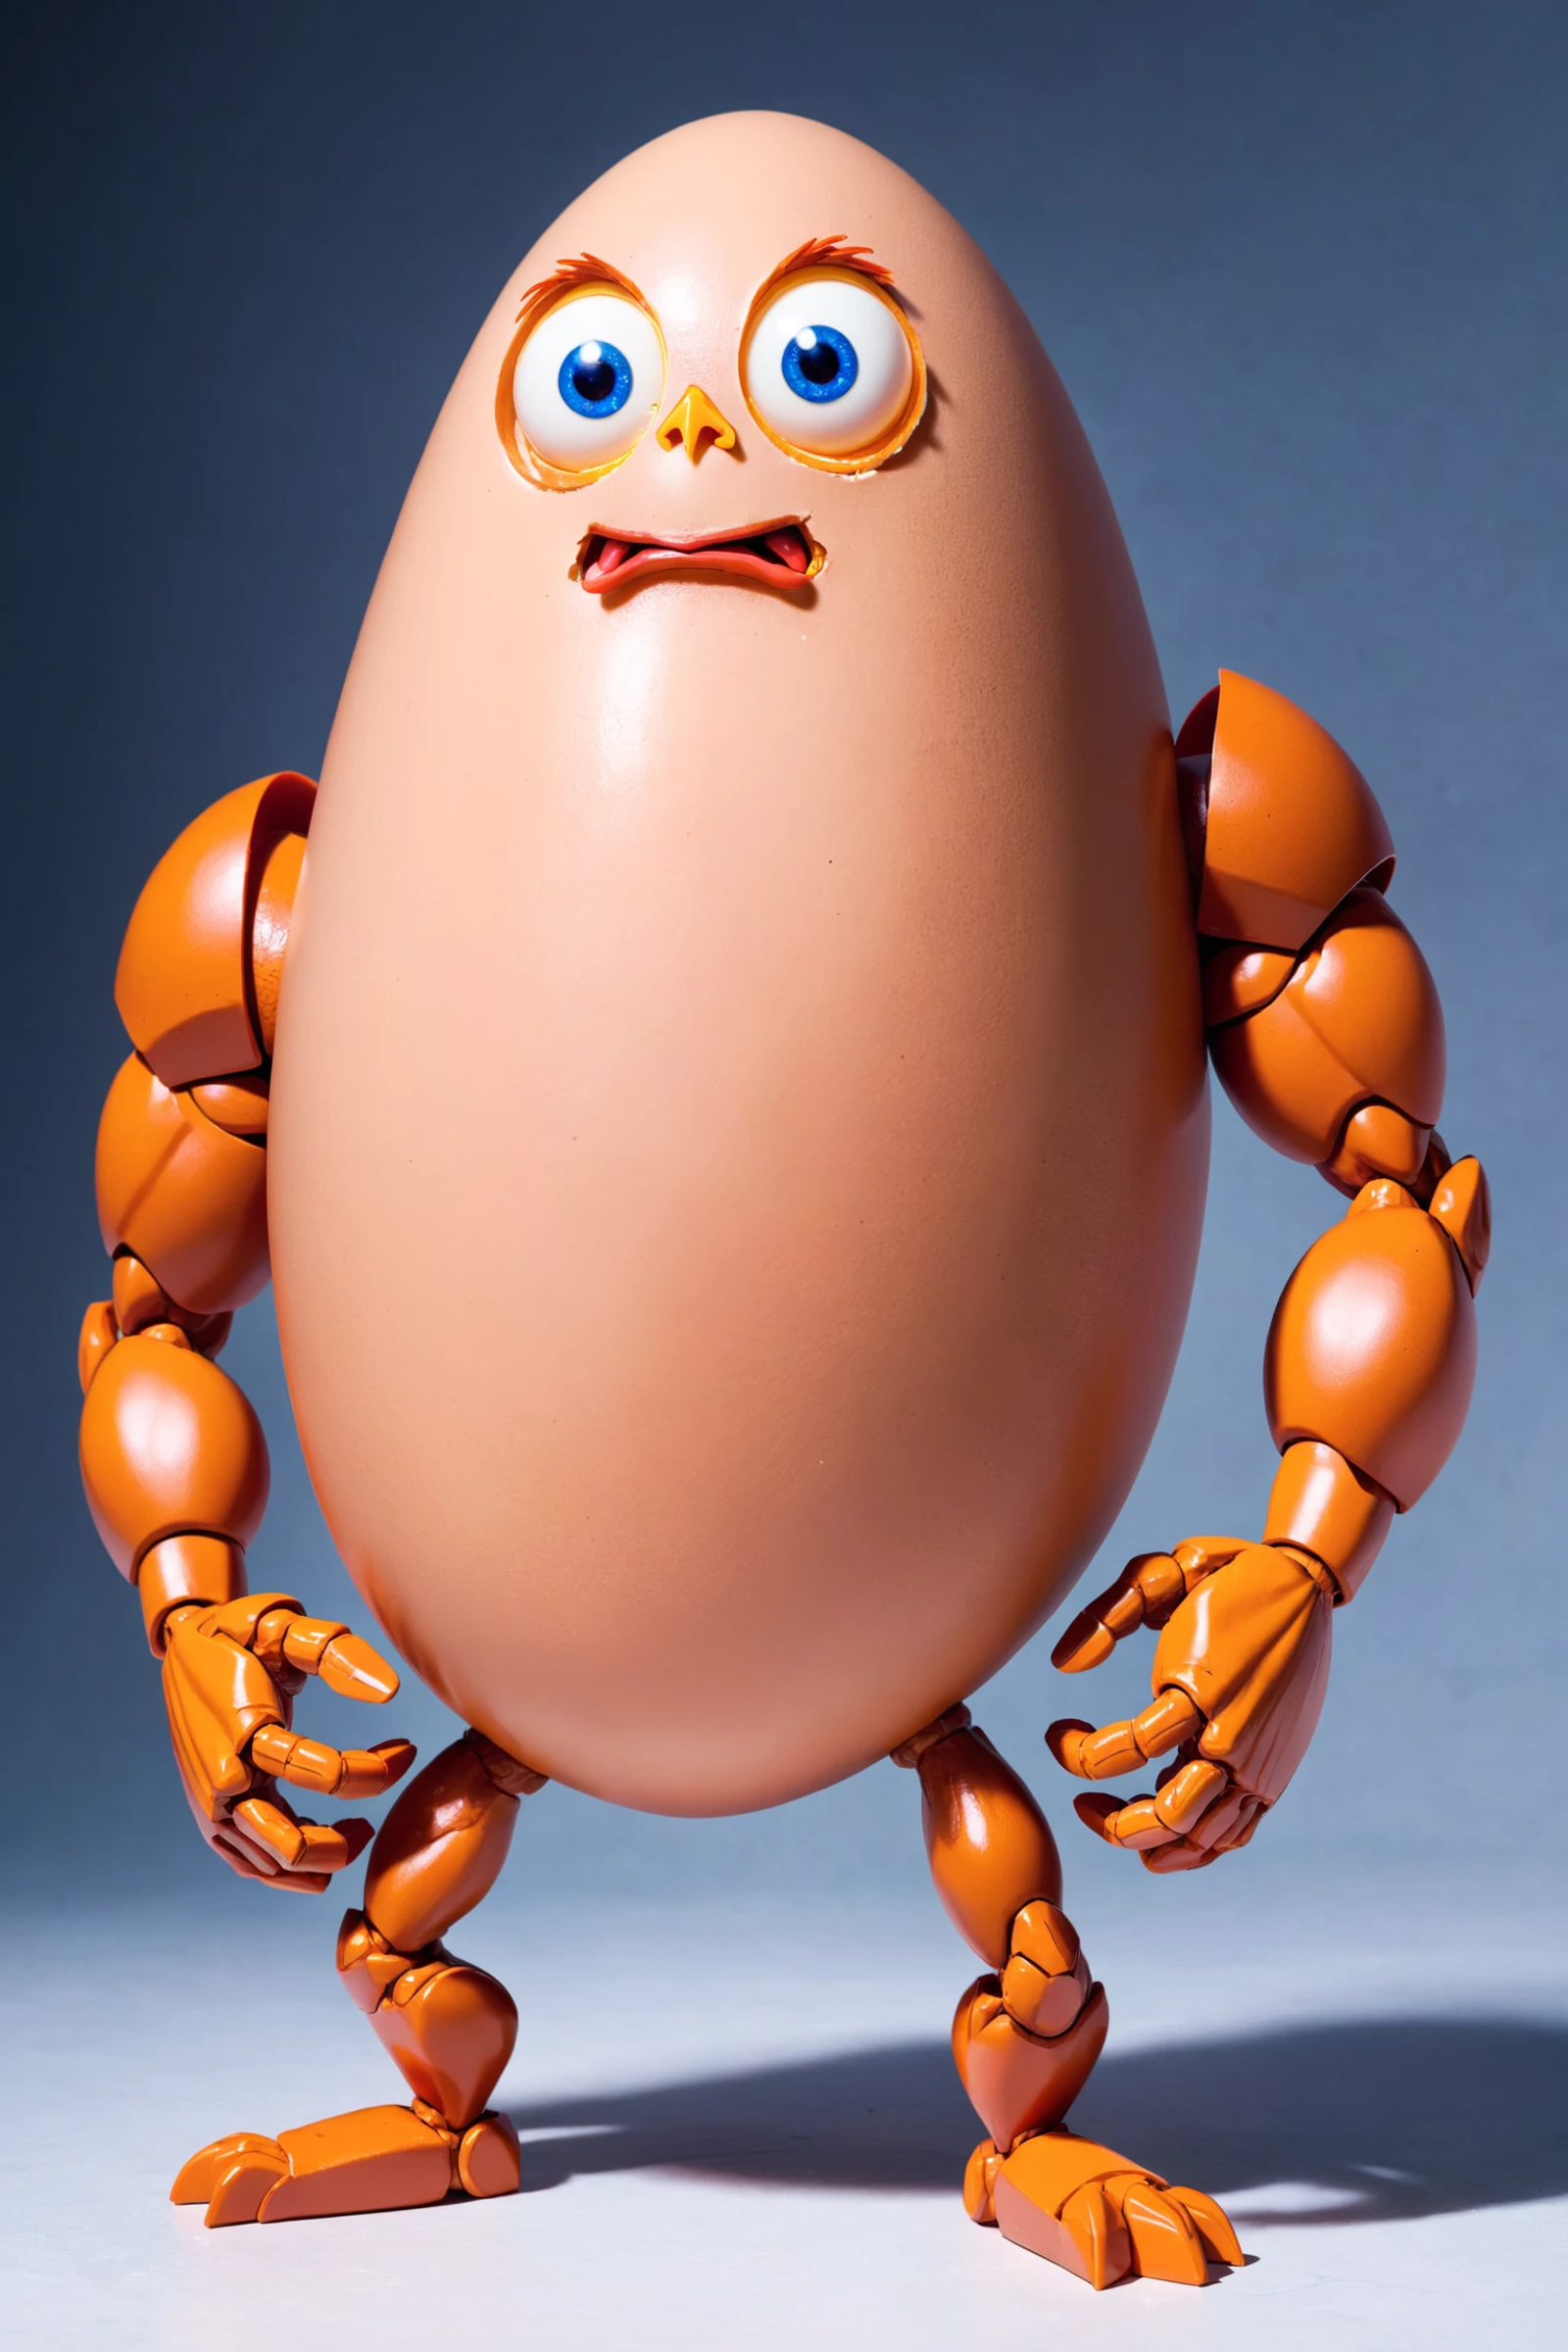 egg with arms and legs, muscular, no human